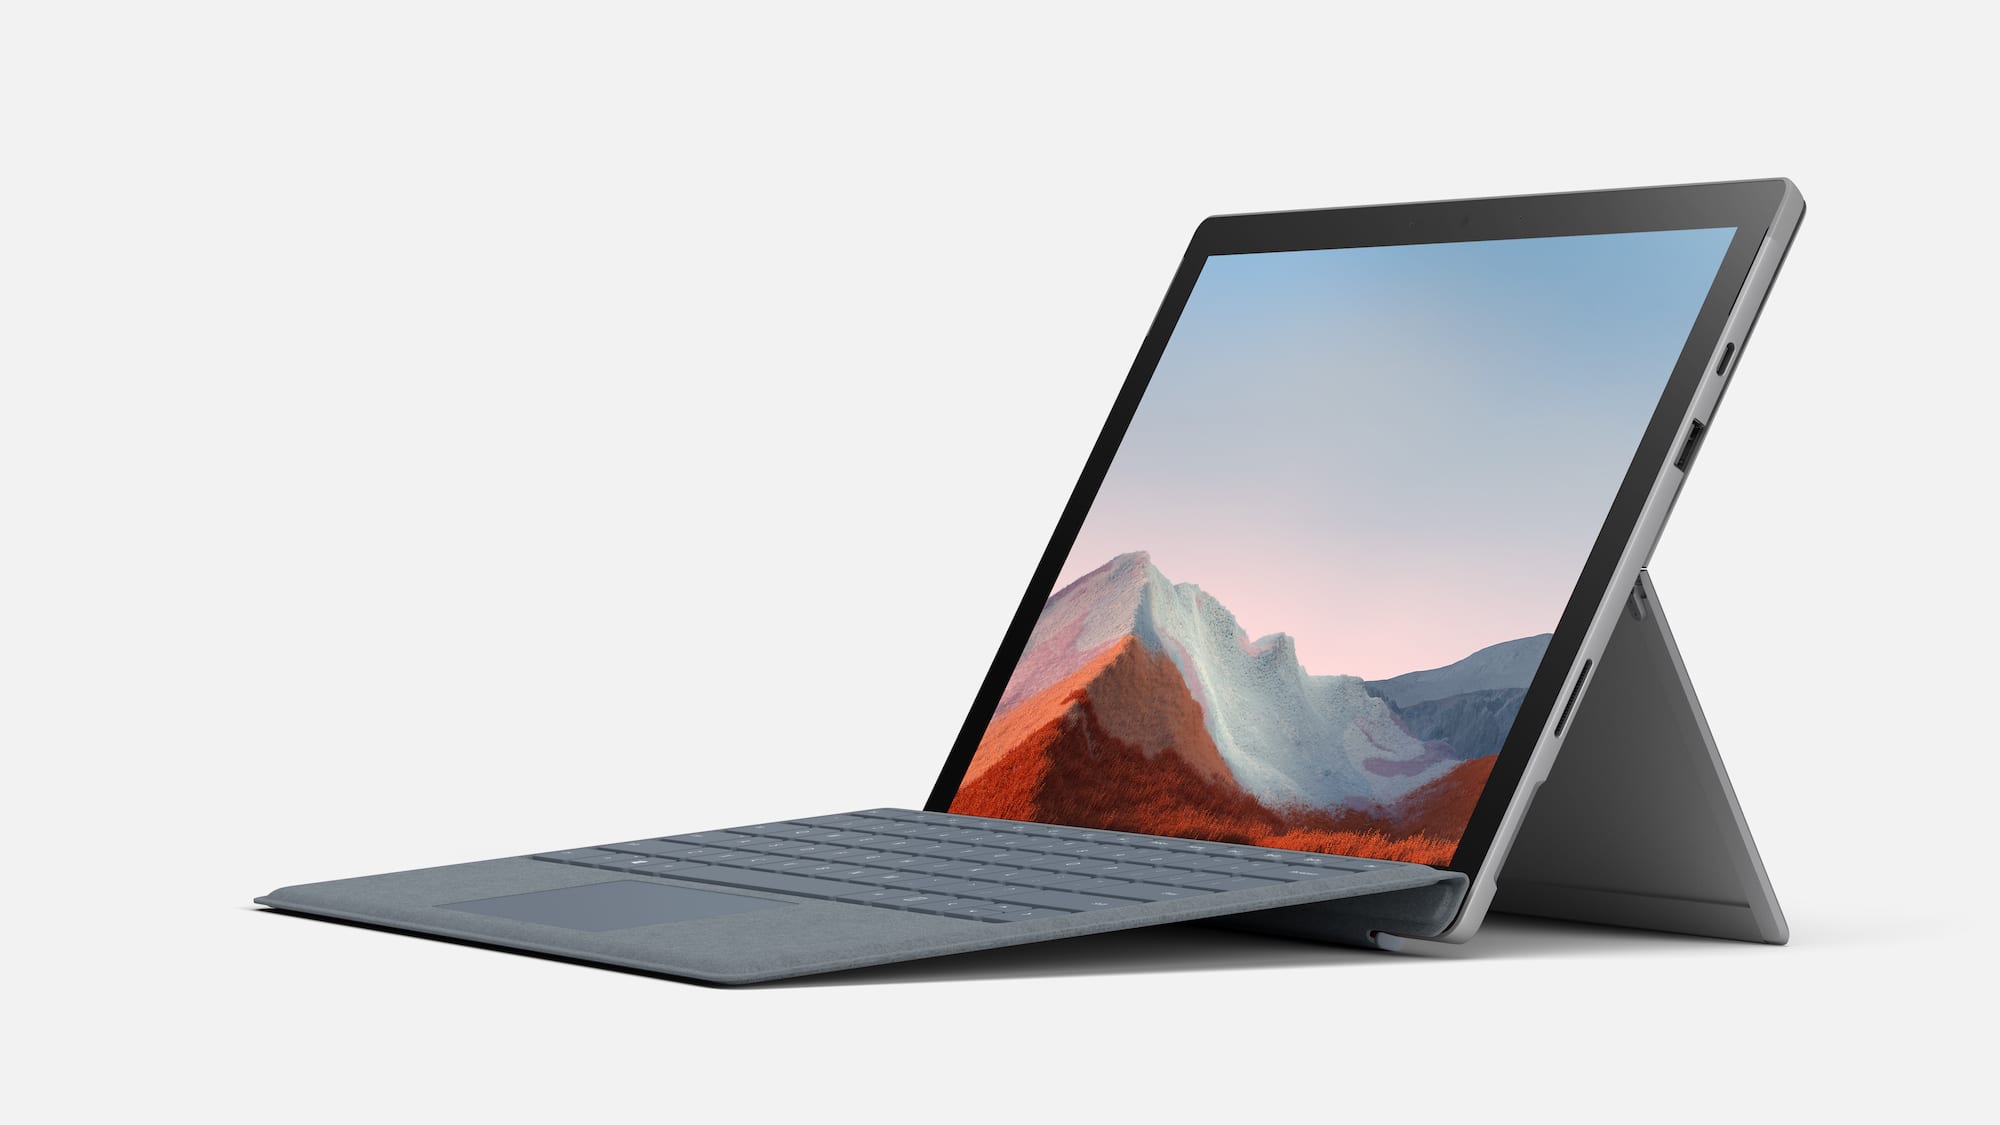 Microsoft Surface Pro 7 Plus for Business Announced, Starting at $ 899